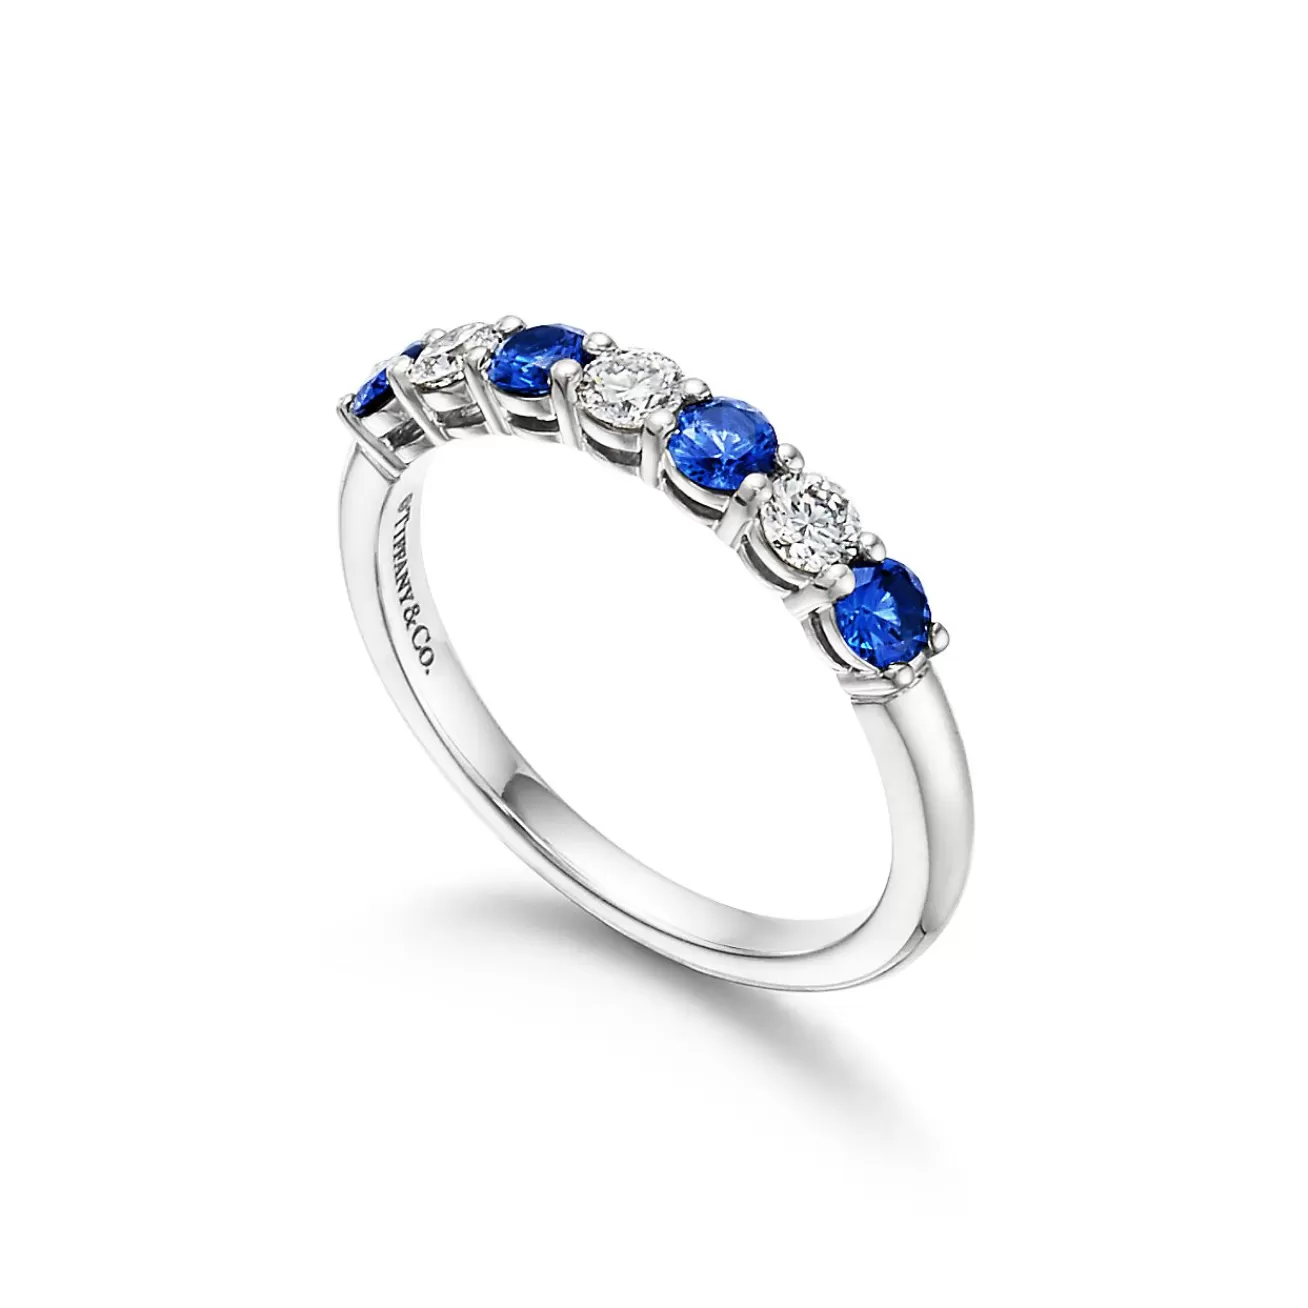 Tiffany & Co. Tiffany Forever Band Ring in Platinum with a Half-circle of Sapphires & Diamonds | ^Women Rings | Stacking Rings